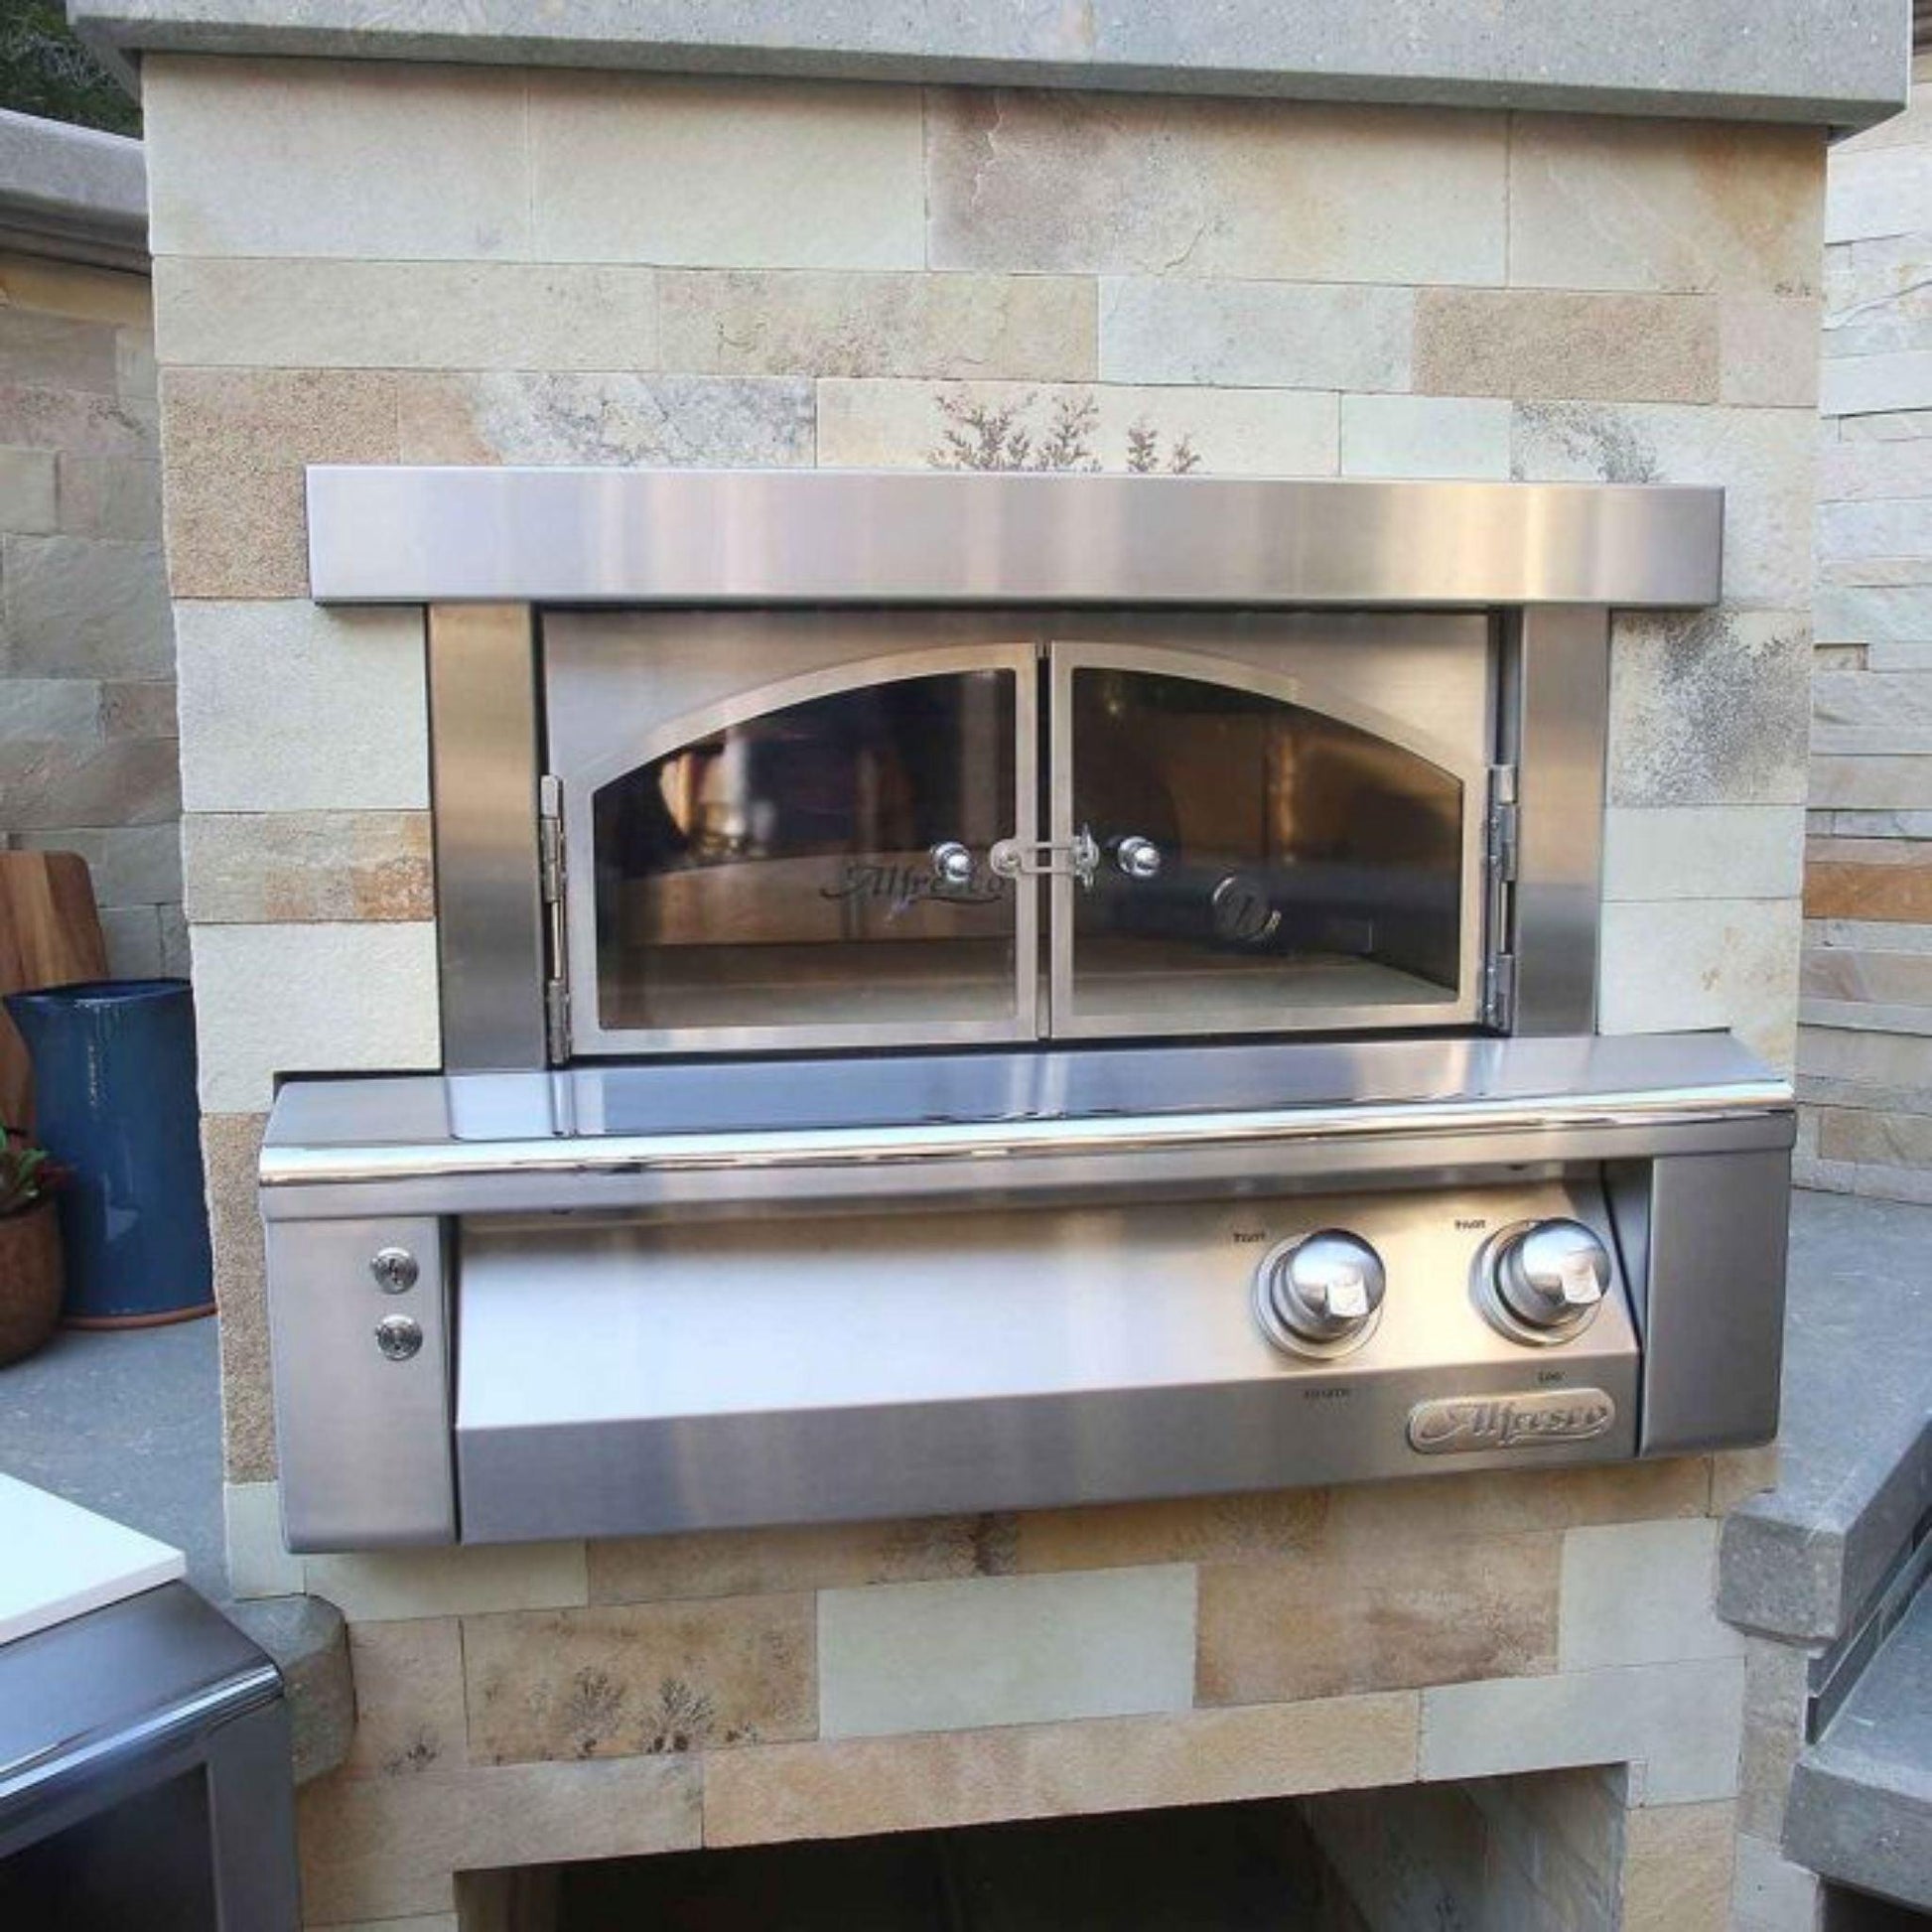 Alfresco 30" Traffic Yellow Gloss Natural Gas Pizza Oven for Built-in Installations